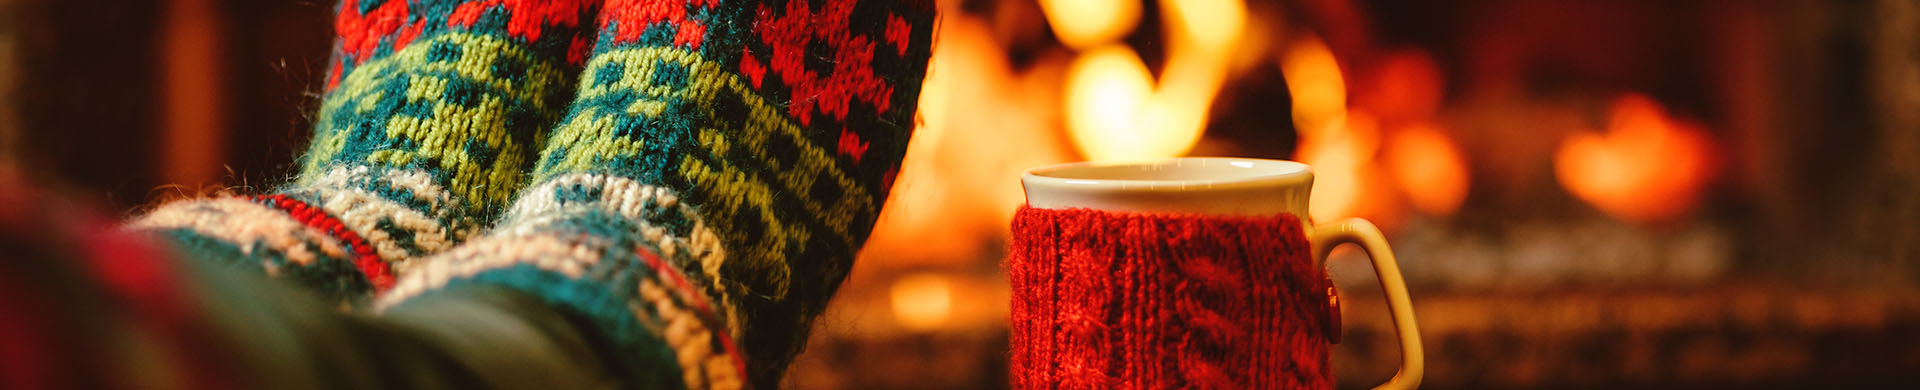 Coffee Cup and Feet in Winter Socks Sitting on Table in Front of Fireplace